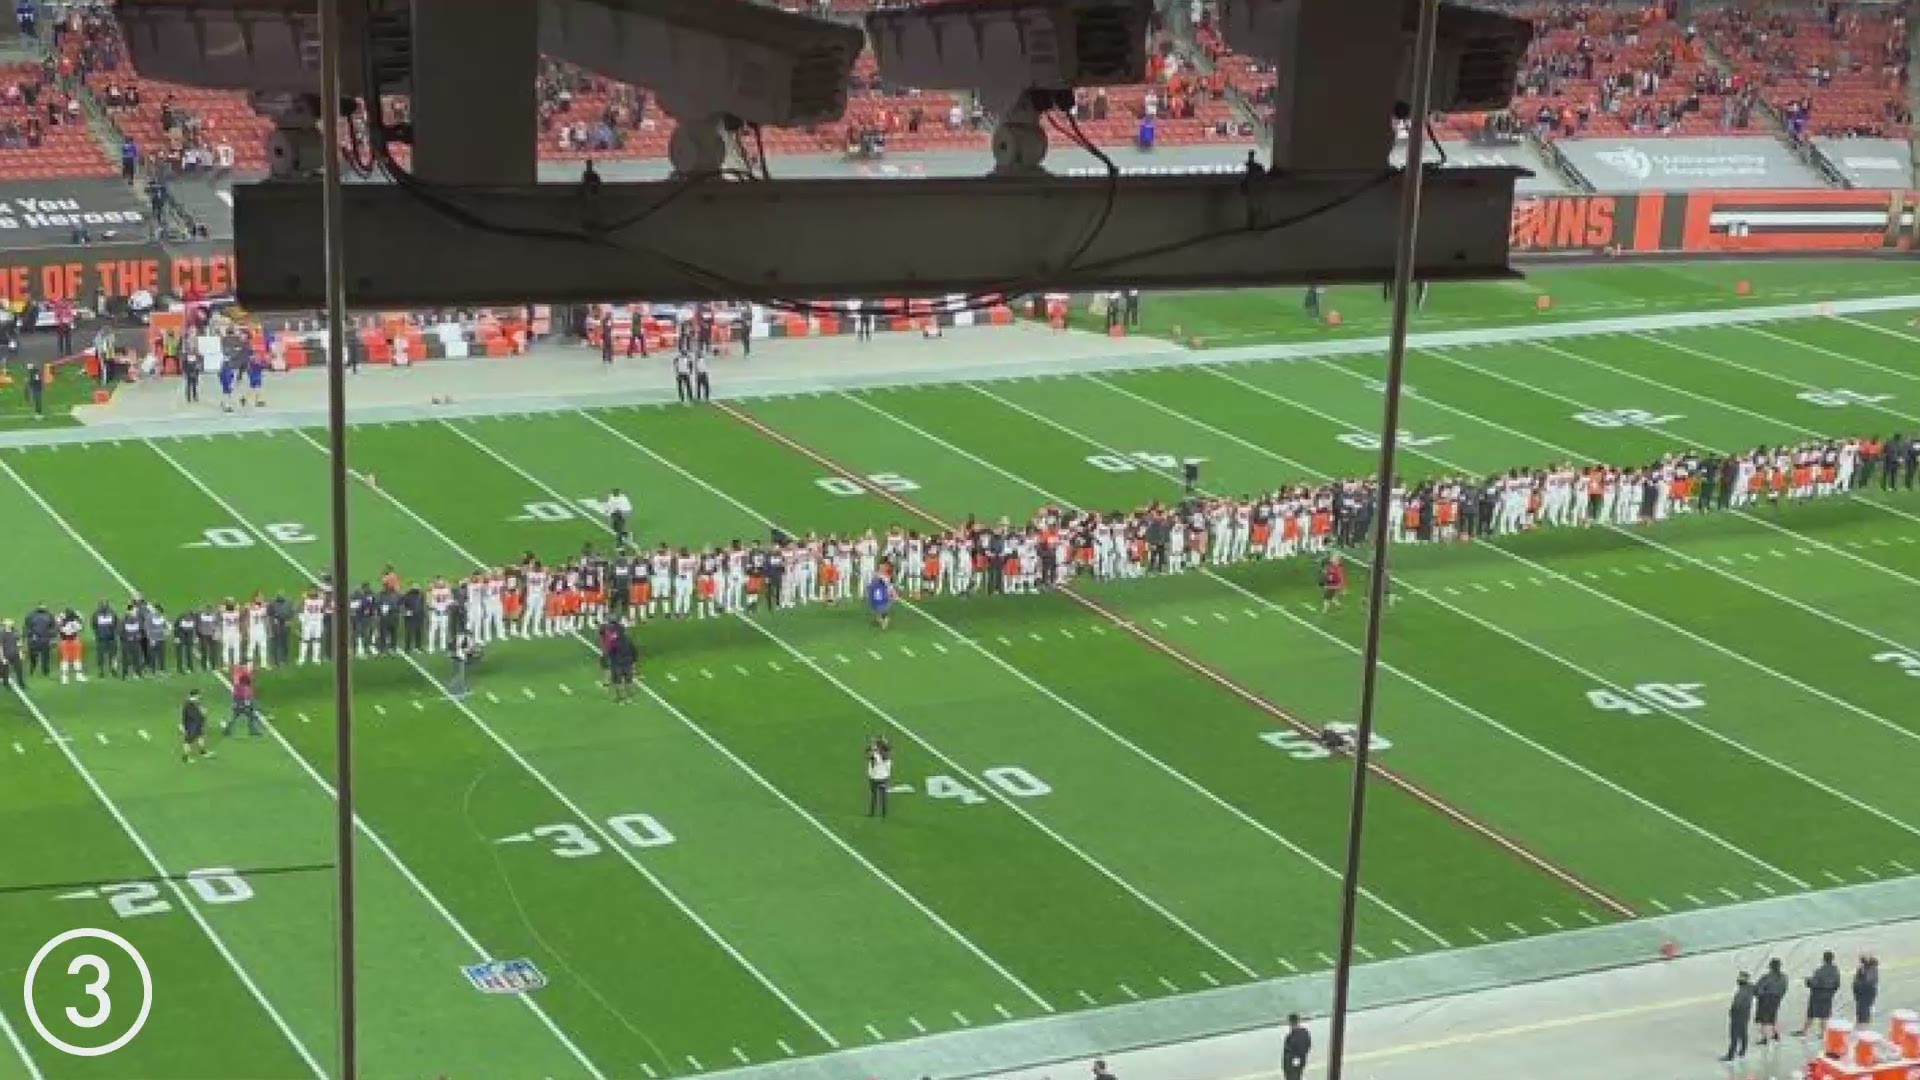 Members of the Cleveland Browns and Cincinnati Bengals stood together with their arms linked prior to their matchup on Thursday Night Football.